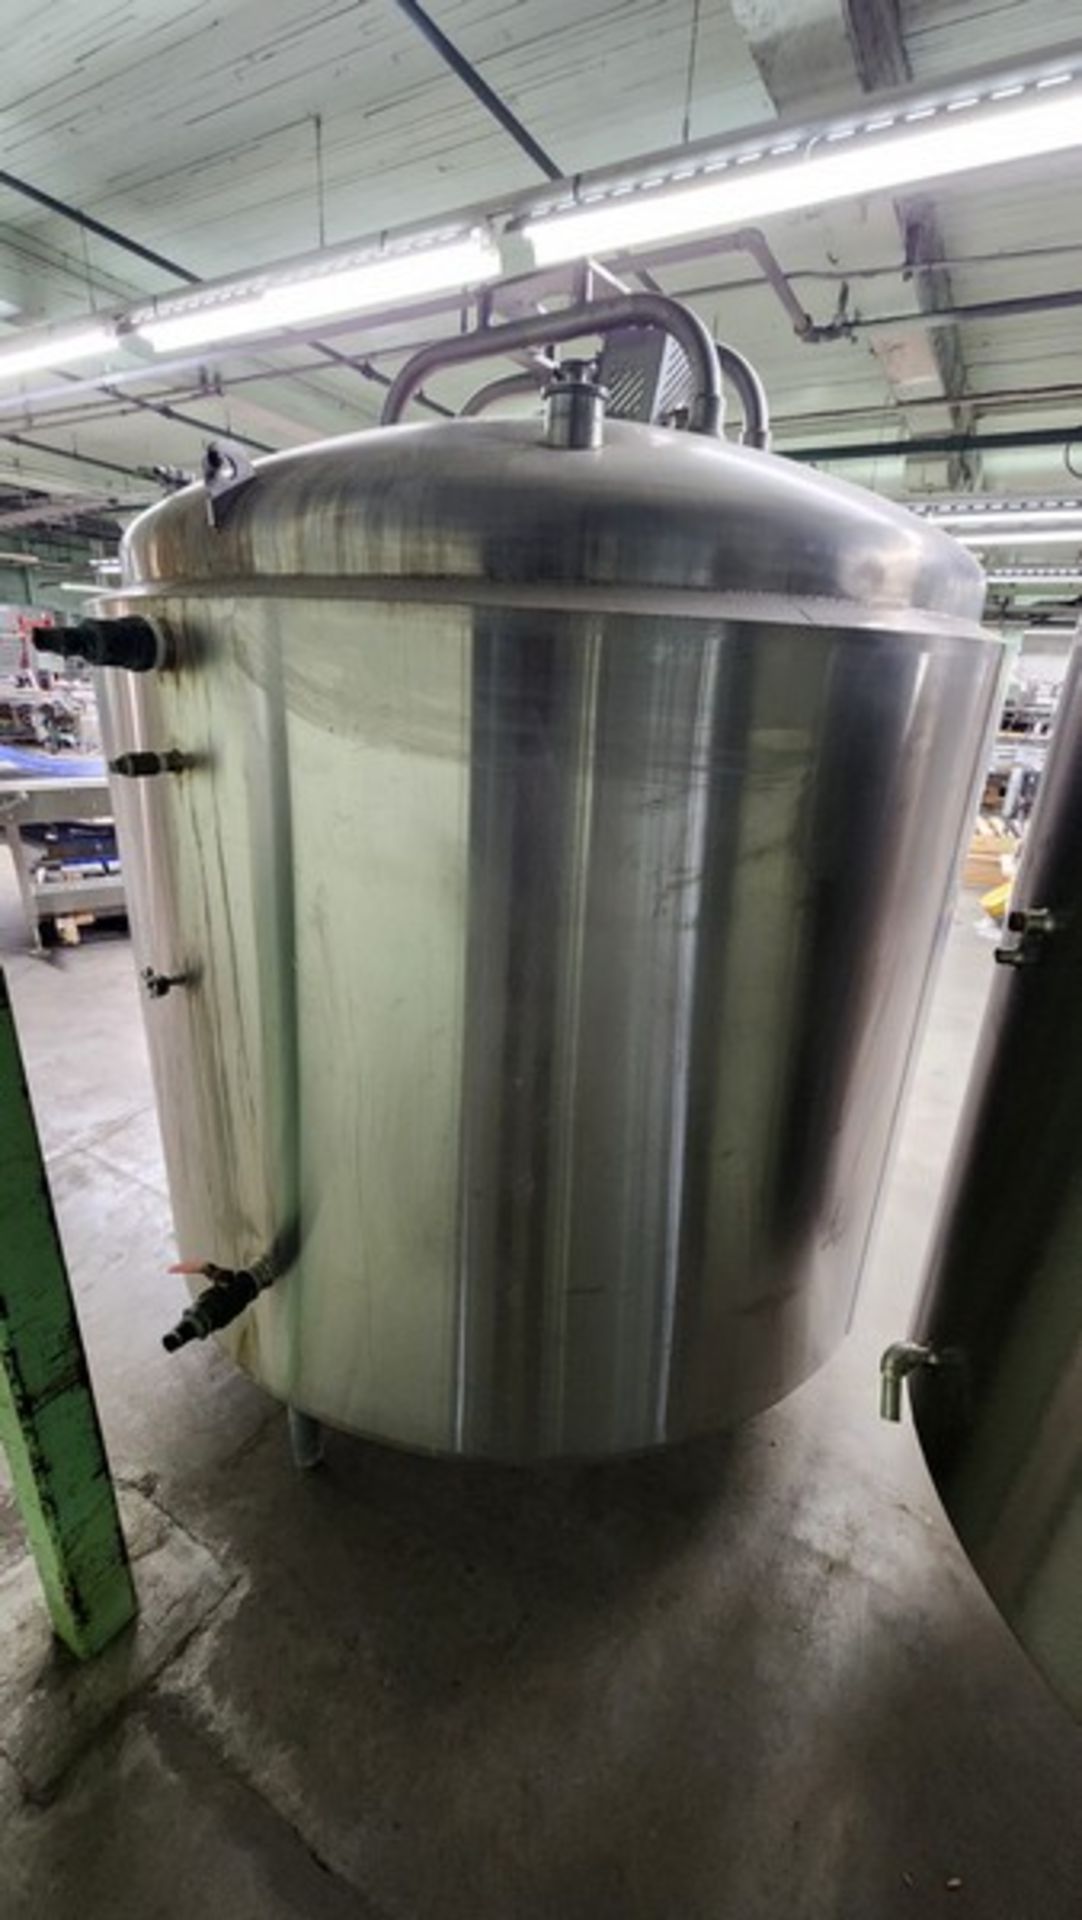 Cooling mixing tank 316 Stainless steel capacity of 750 usg motor\gearbox is missing (Loading Fee $ - Image 2 of 4